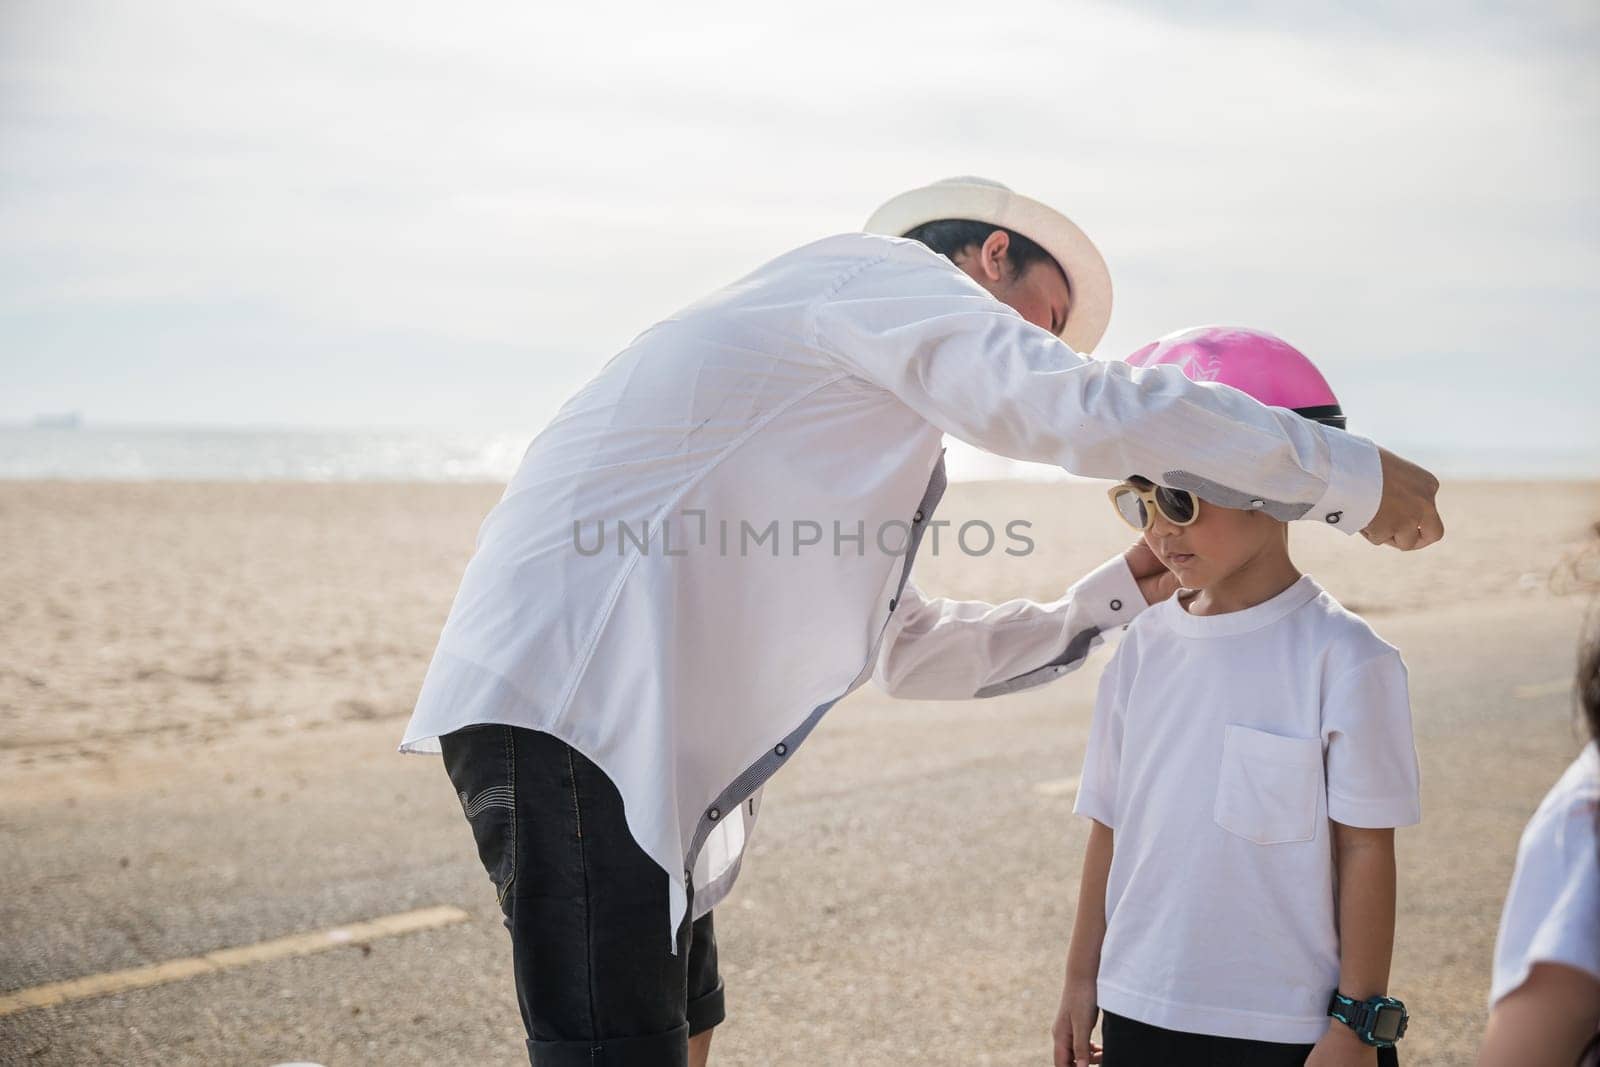 A family on vacation at the beach where the father sporting a safety helmet teaches his cheerful son the balance and joy of bicycle riding a memorable tourism day filled with family happiness.